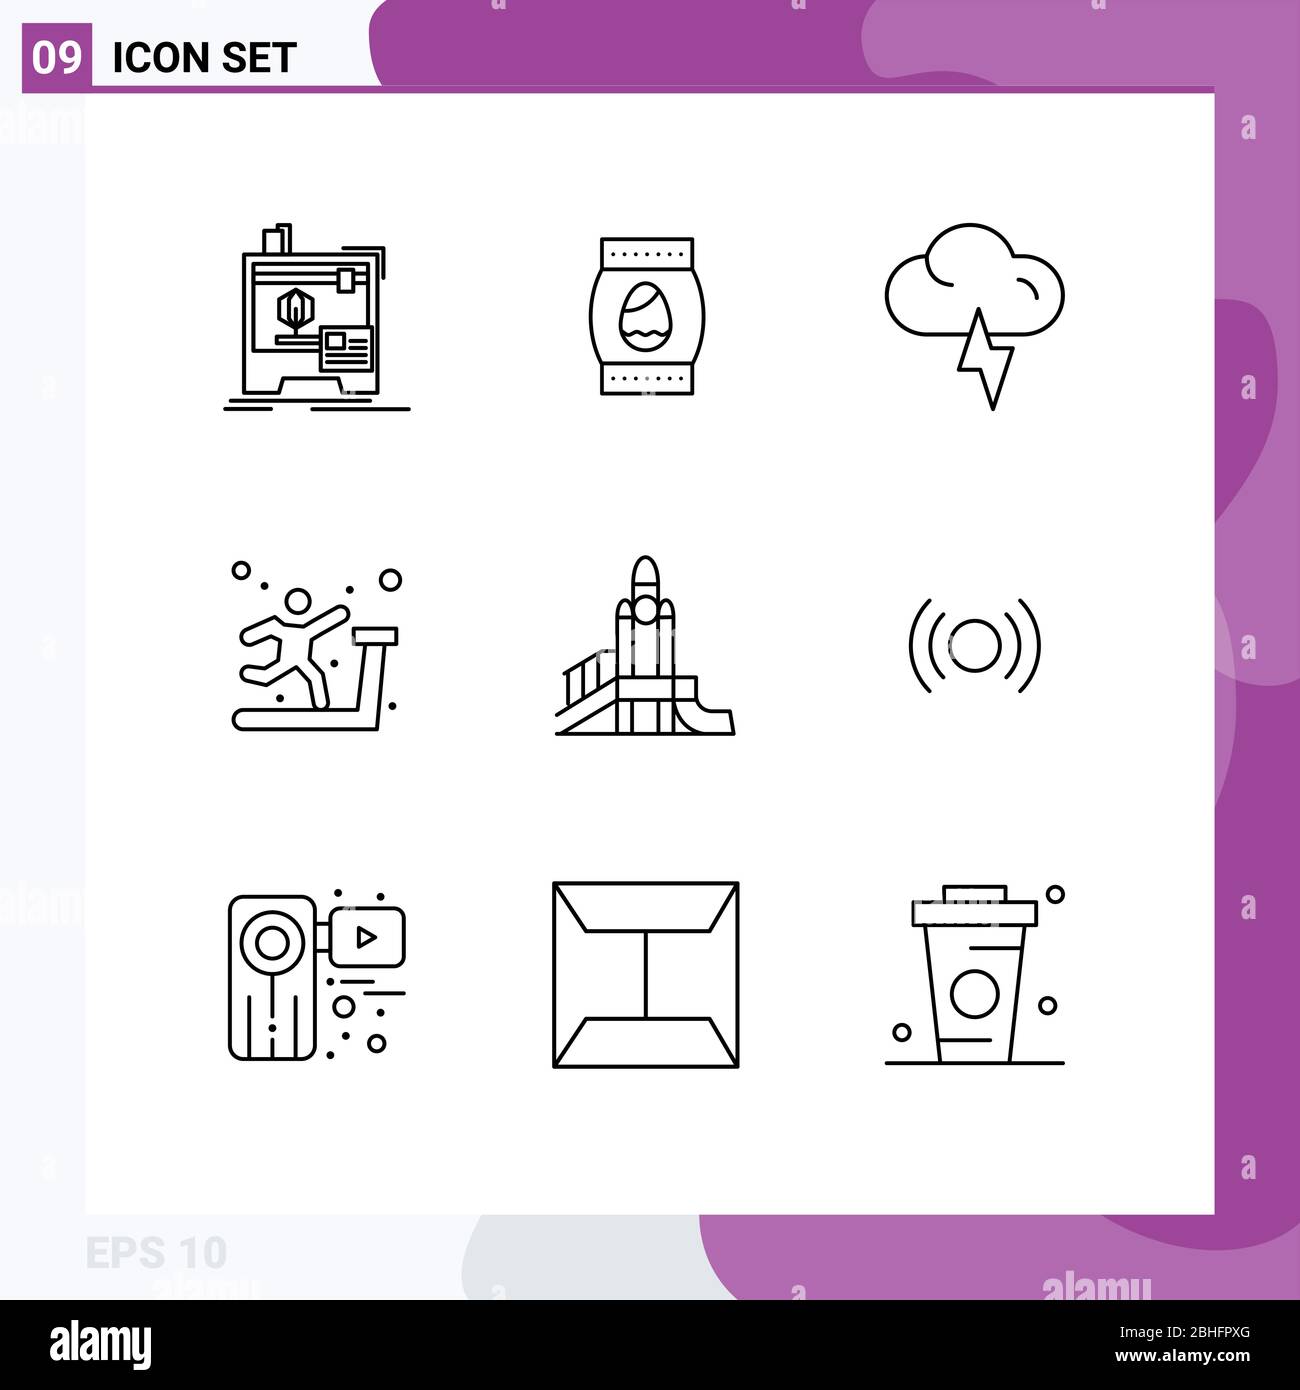 Mobile Interface Outline Set of 9 Pictograms of nuclear, bomb, cloud, treadmill, gym Editable Vector Design Elements Stock Vector